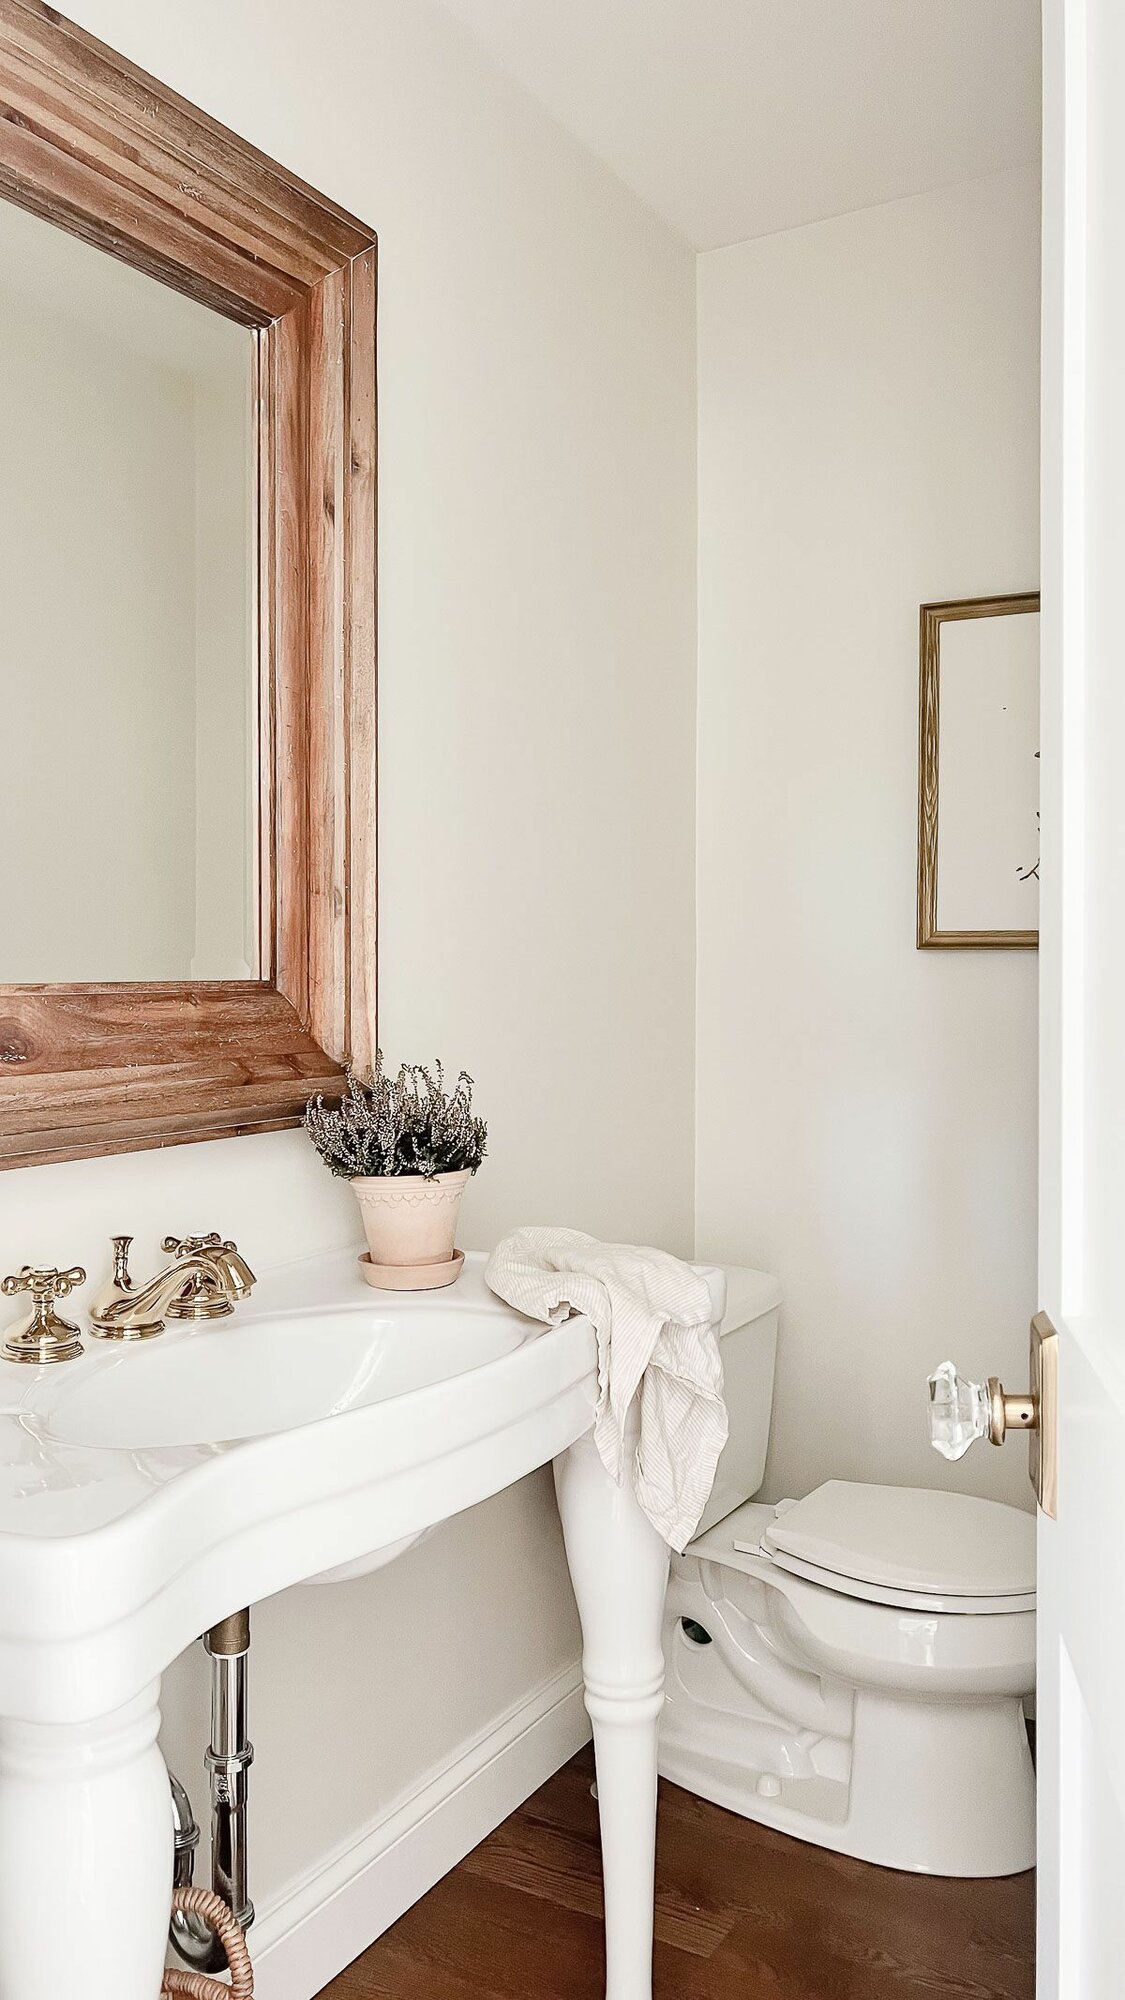 A guest bath with a wooden framed mirror and brass faucet.